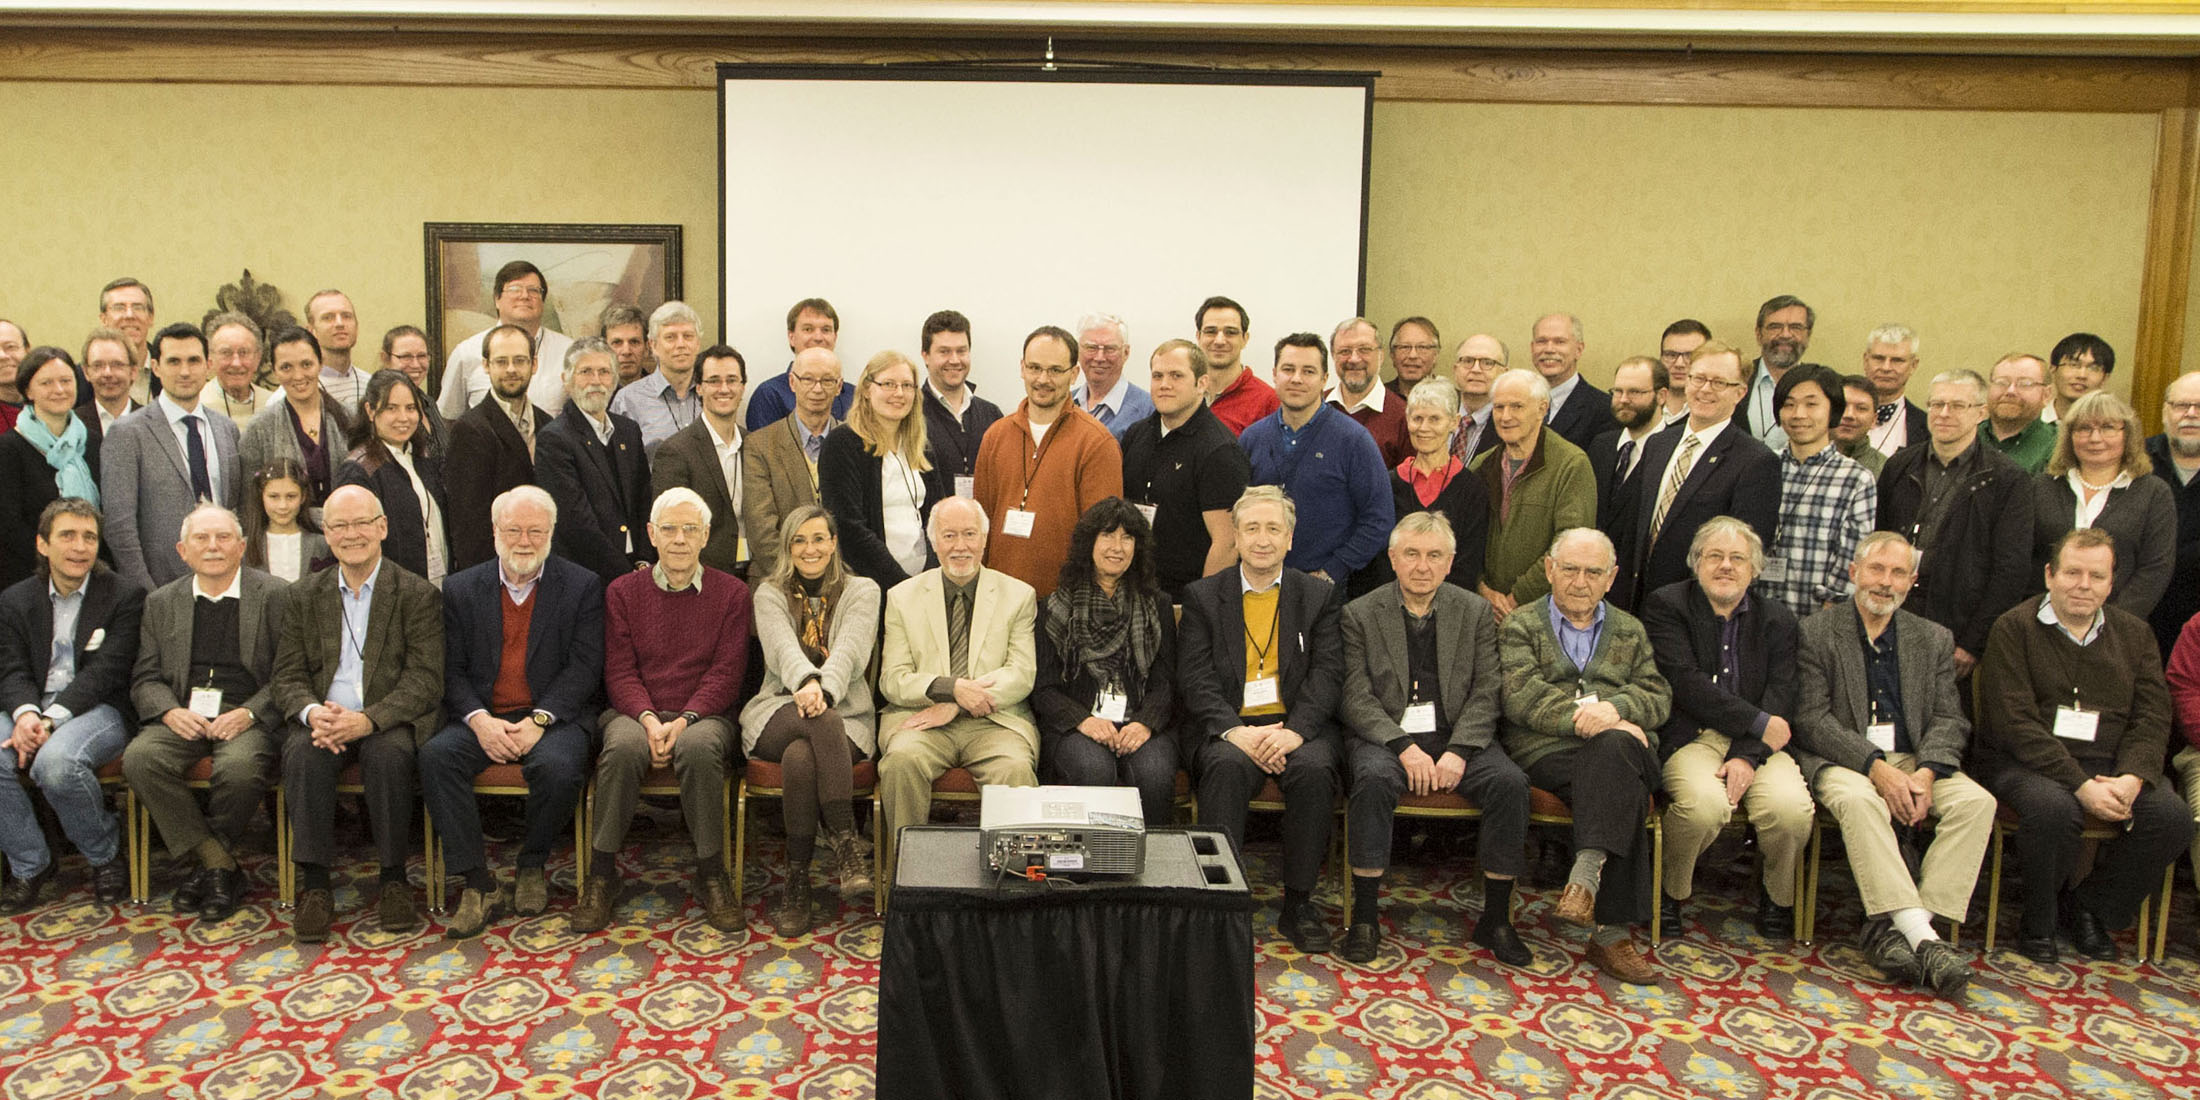 2014 ASMD Conference Photo